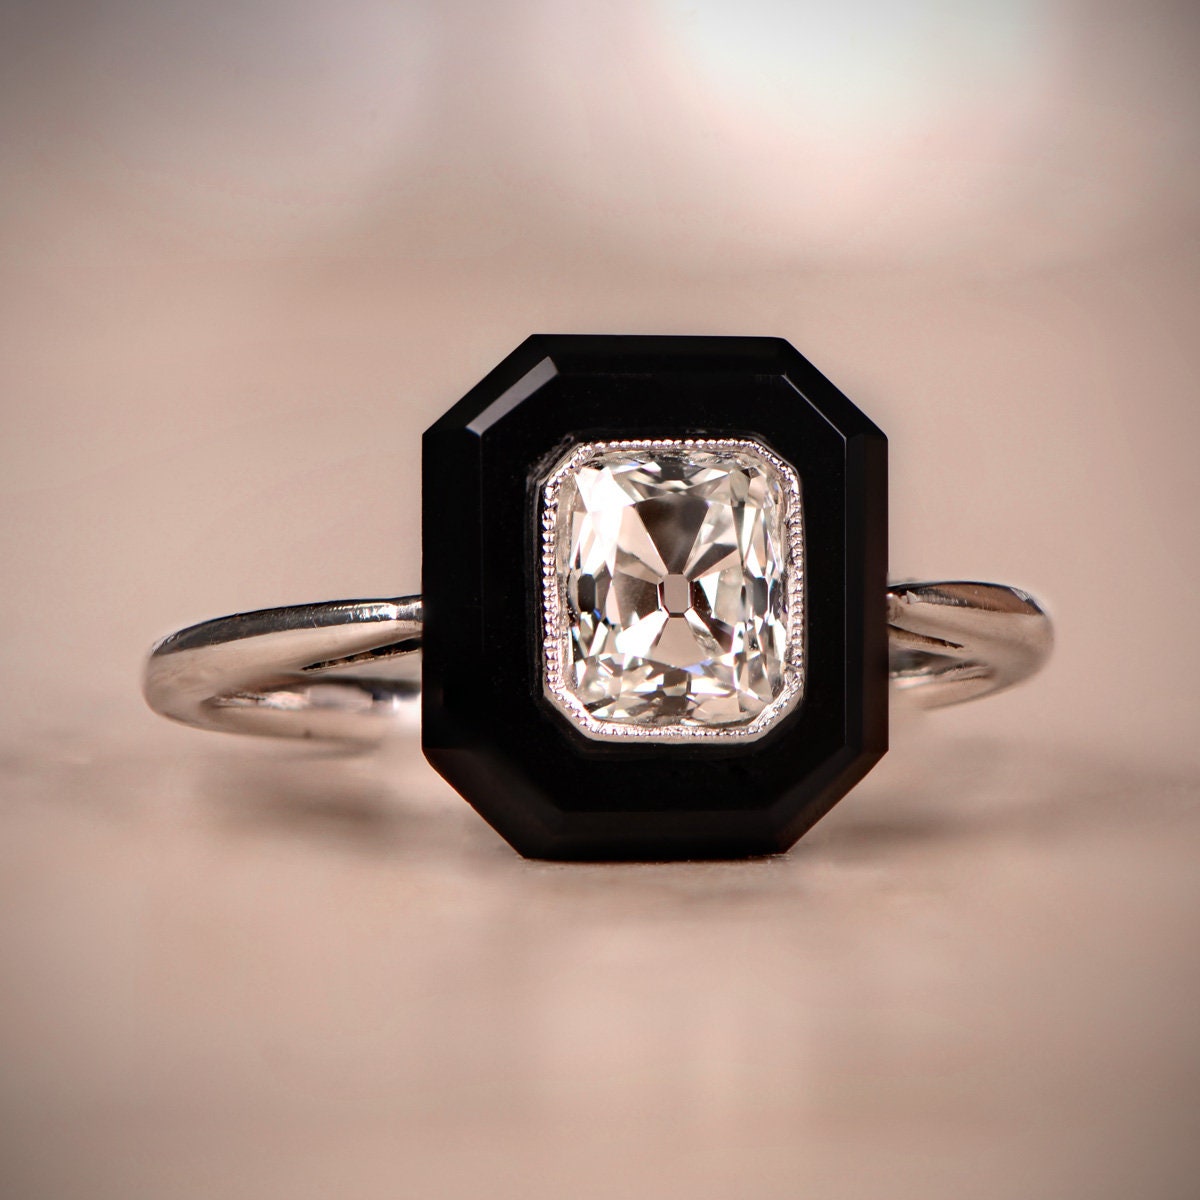 1 10ct Diamond Engagement Ring With Onyx Halo Featuring Antique 1 10 Carat Diamond Center Estate Diamond Jewelry Collection